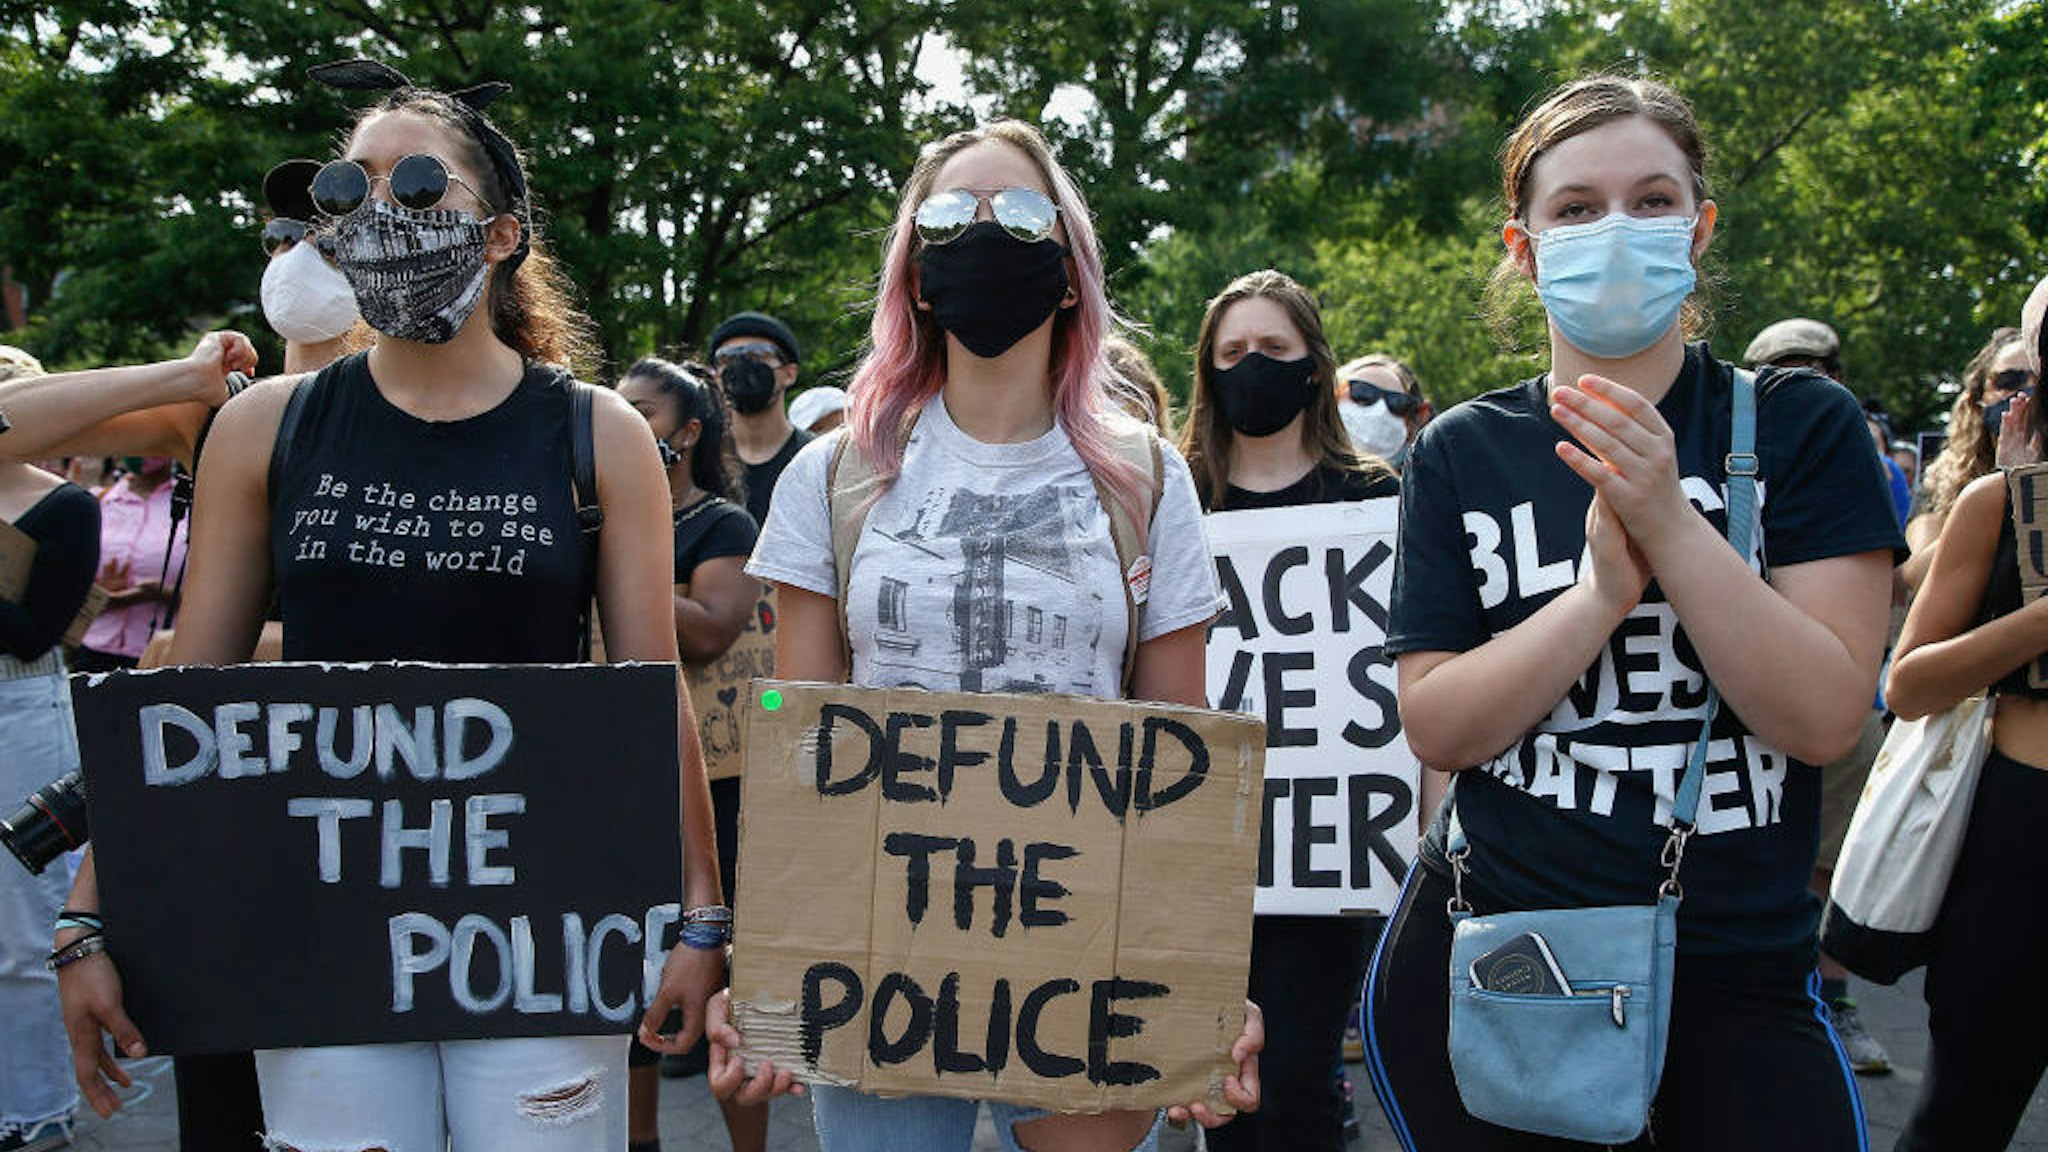 Demonstrators hold placards saying 'Defund The Police' during the protest. Protests continue against police brutality and racial injustice in New York City. (Photo by John Lamparski/SOPA Images/LightRocket via Getty Images)